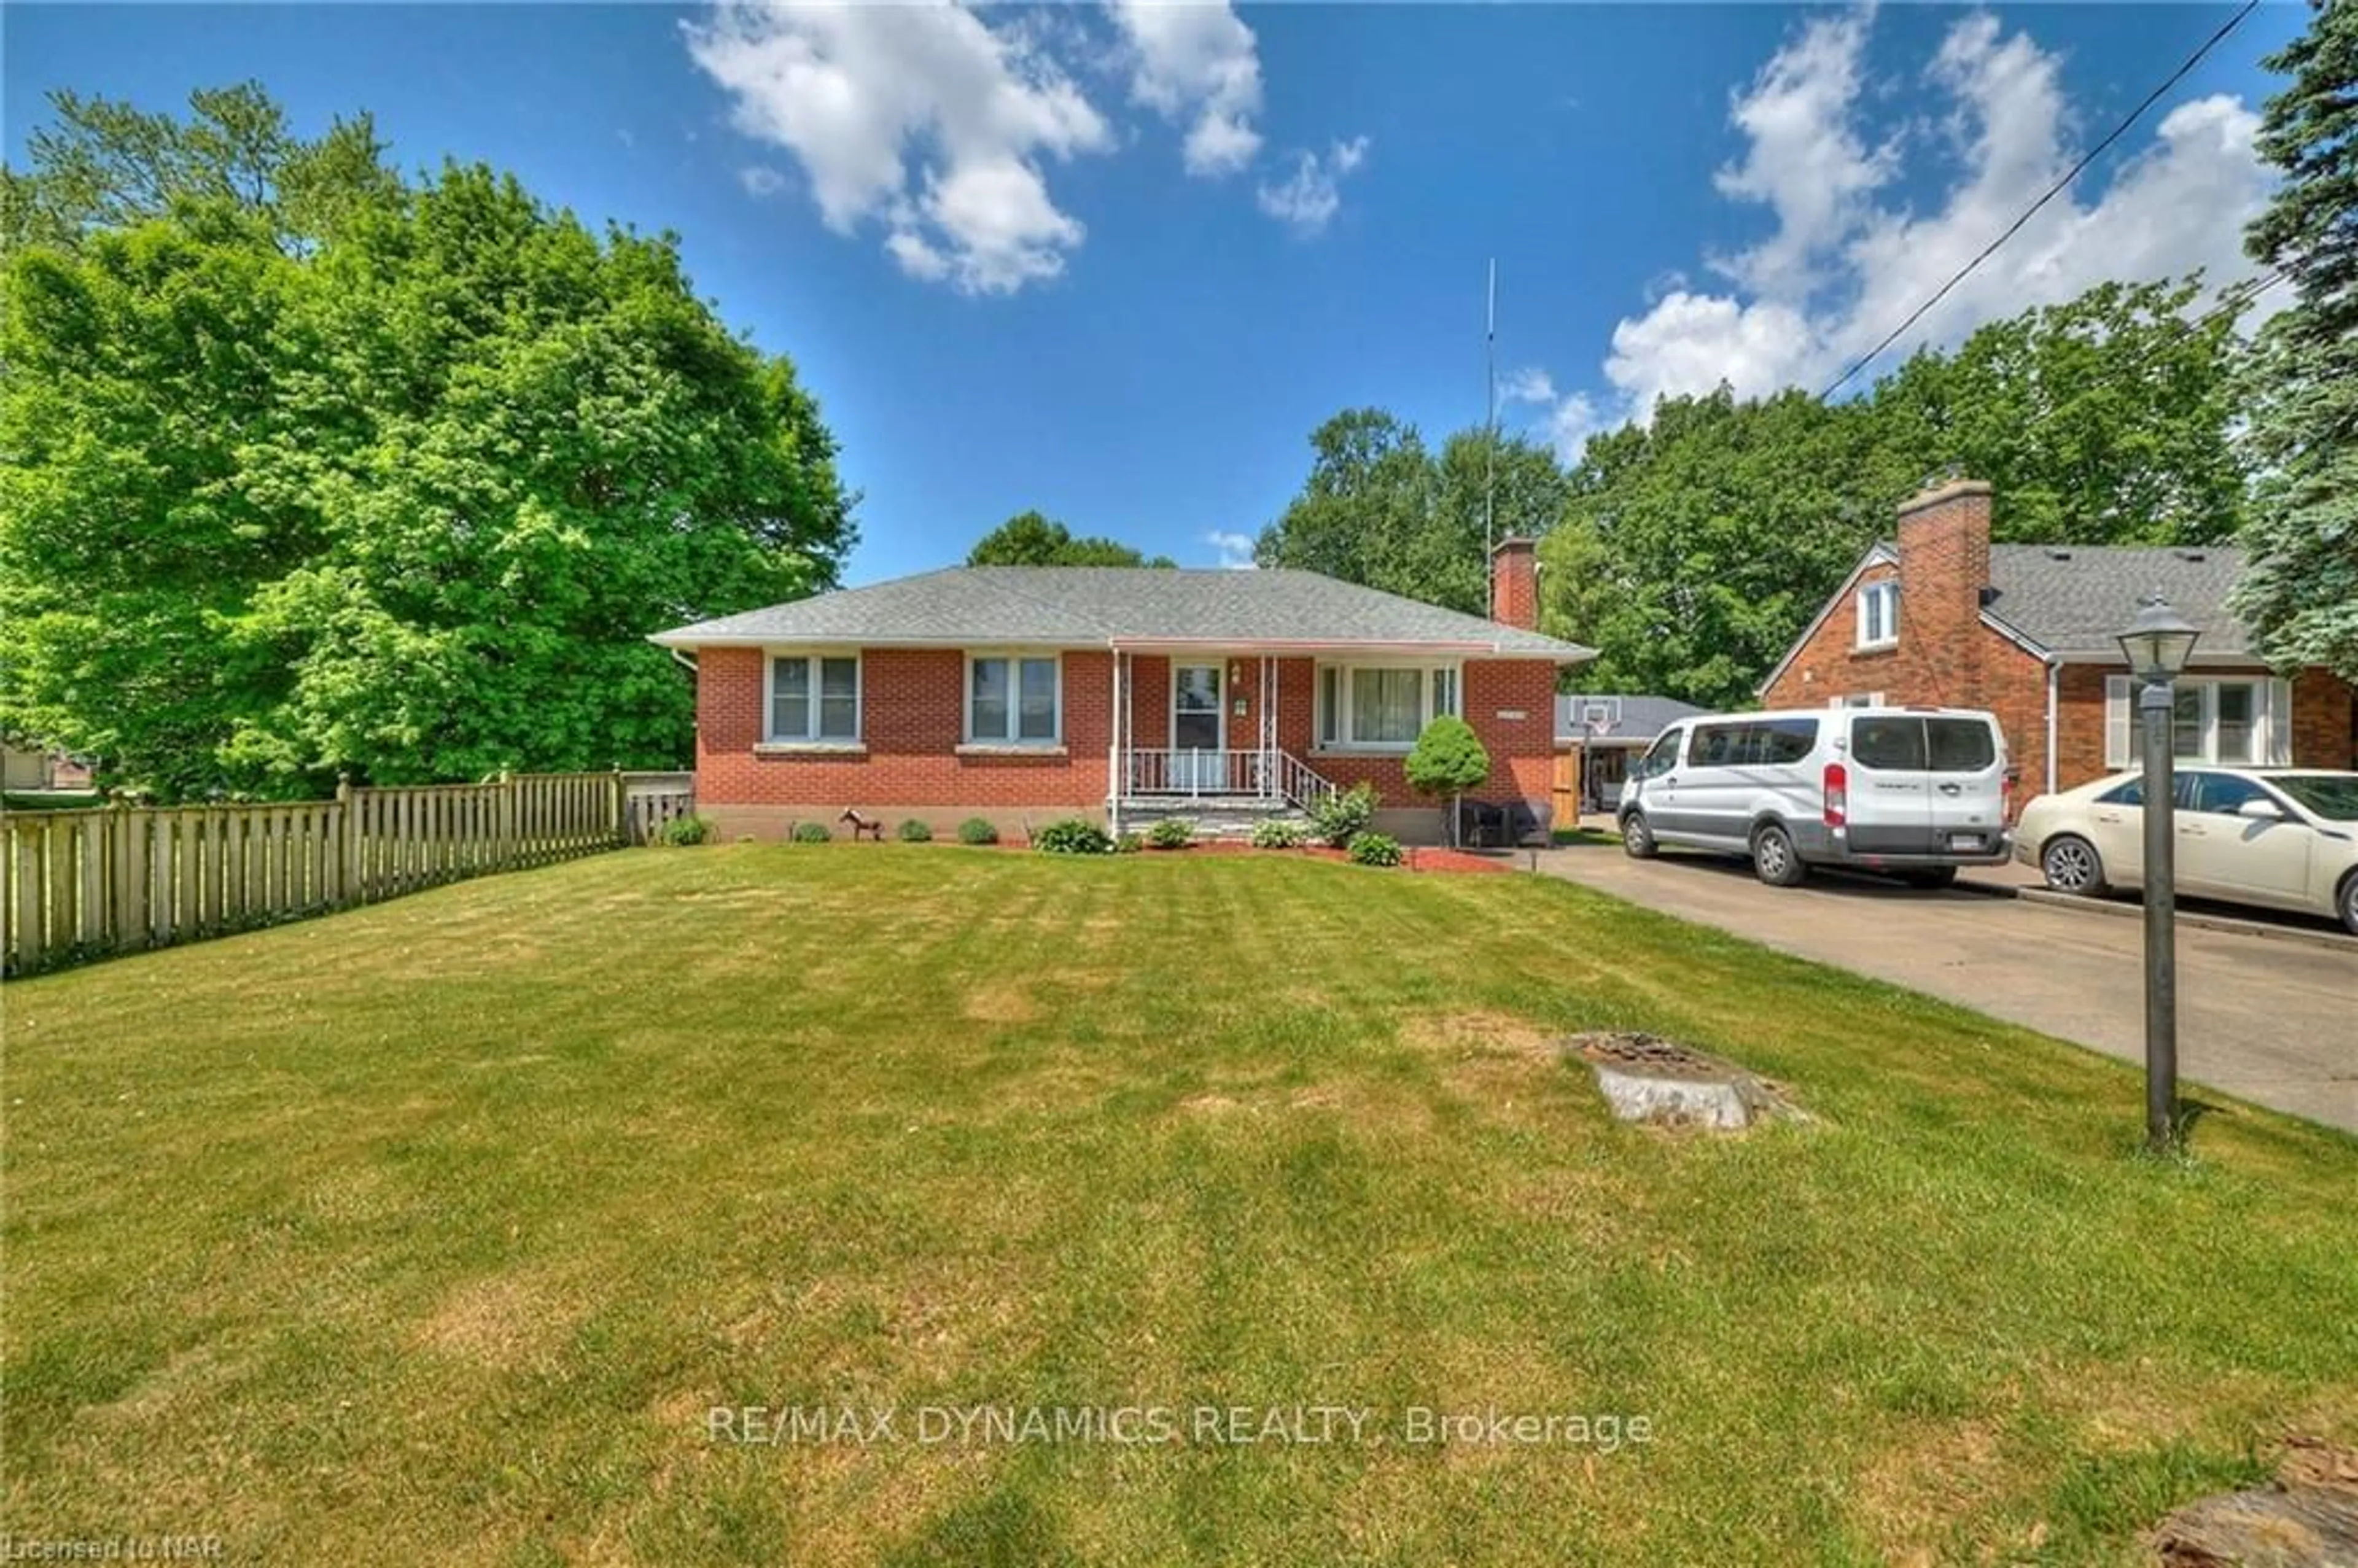 Frontside or backside of a home for 6357 Dorchester Rd, Niagara Falls Ontario L2G 5T4